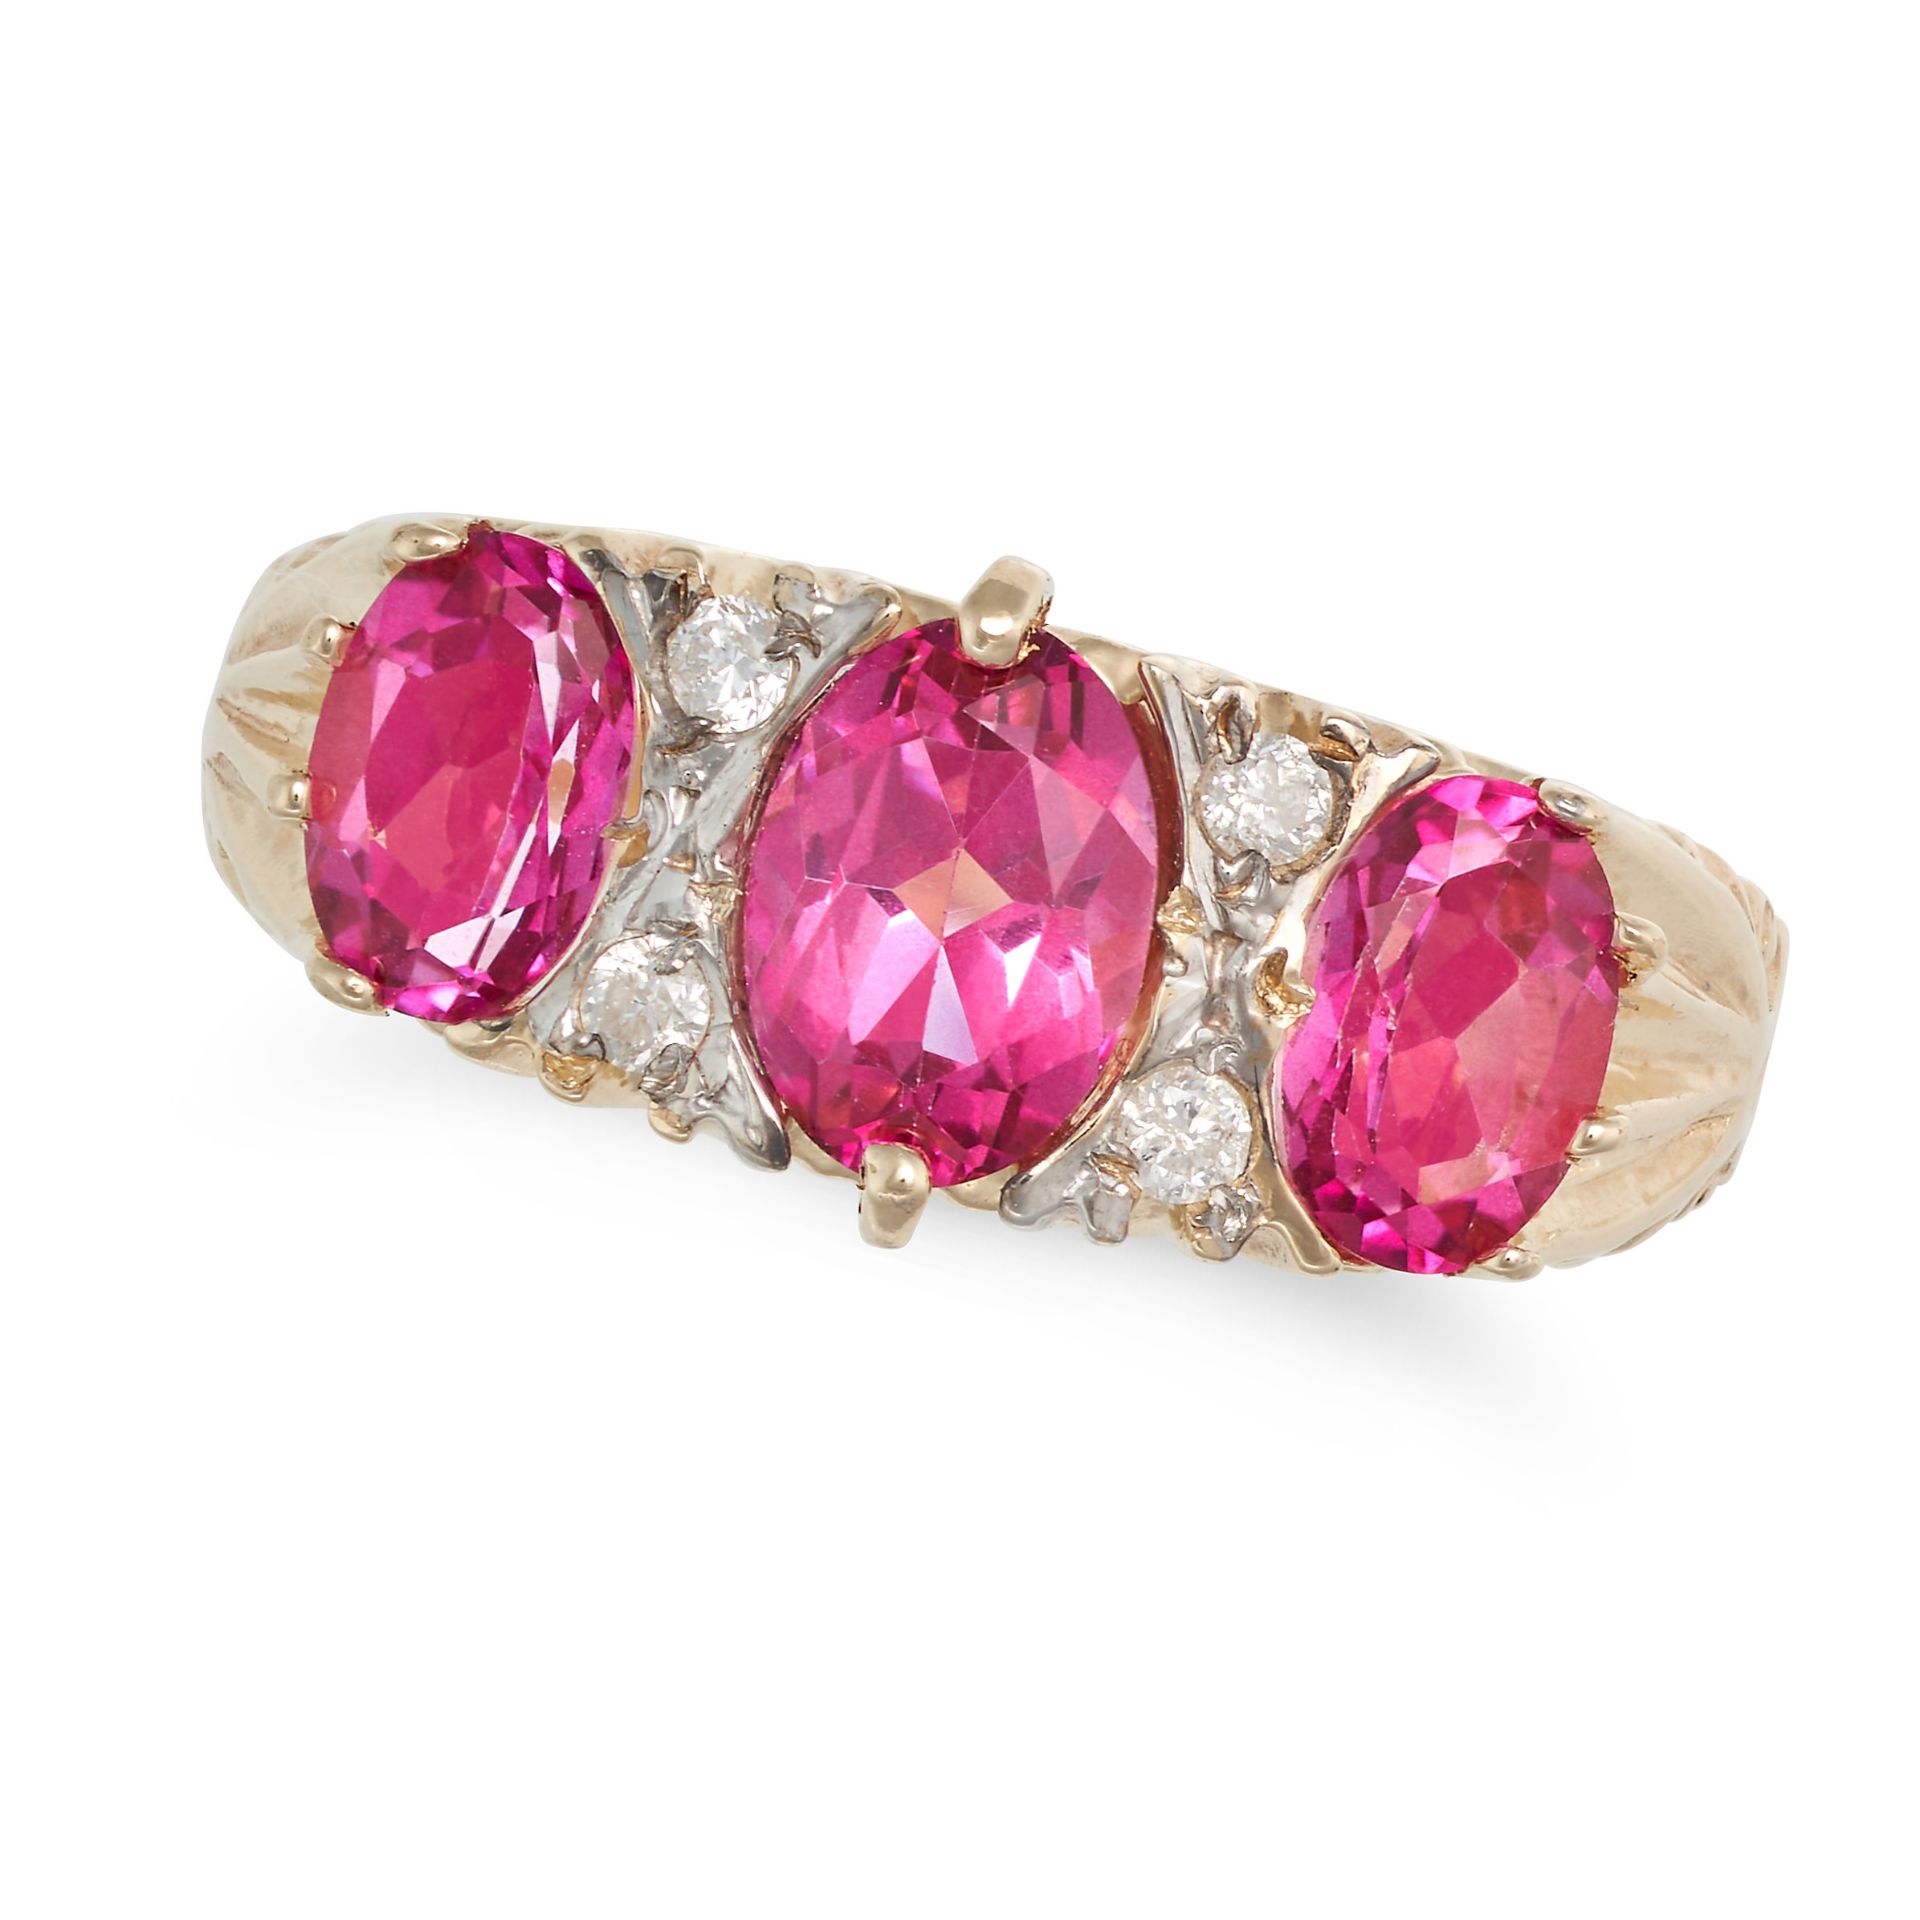 A PINK TOPAZ AND DIAMOND RING in 9ct yellow gold, set with three oval cut pink topaz, accented by...